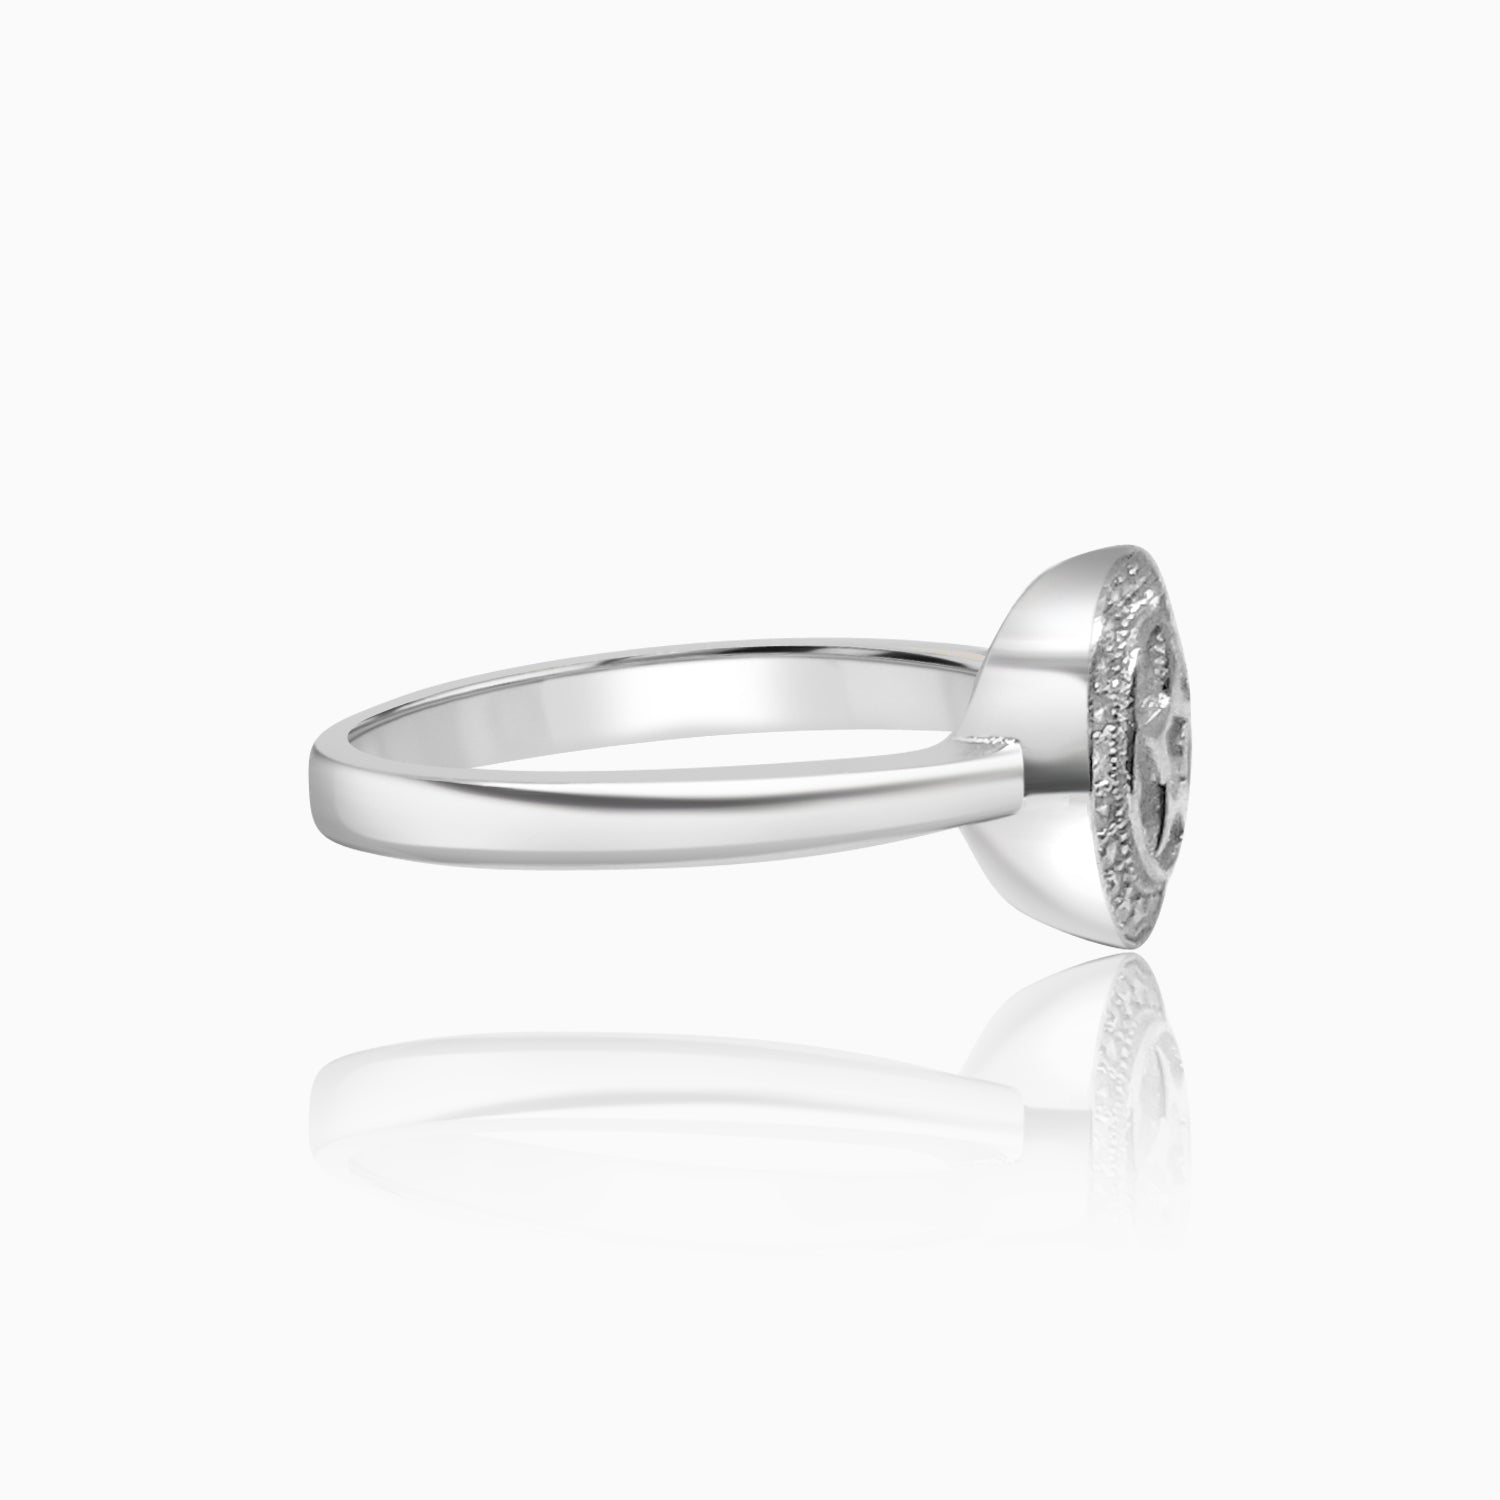 Silver Star in Sparkling Circle Ring